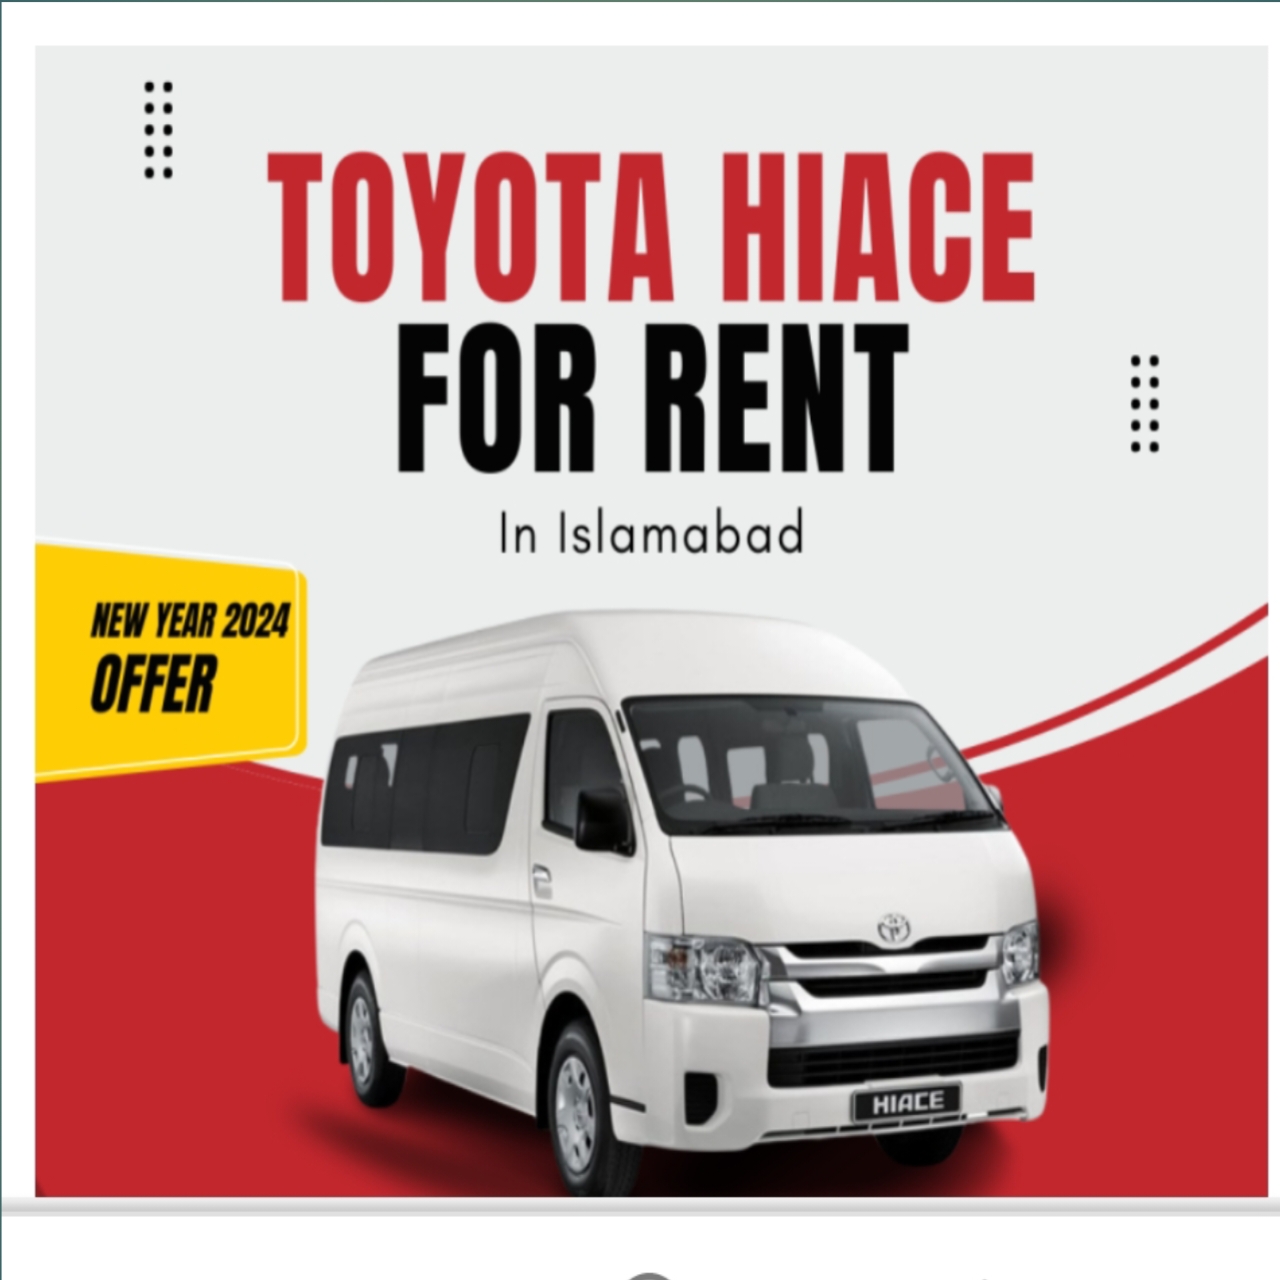 Toyota Hiace for rent in Islamabad & Hiace for rent in Islamabad 